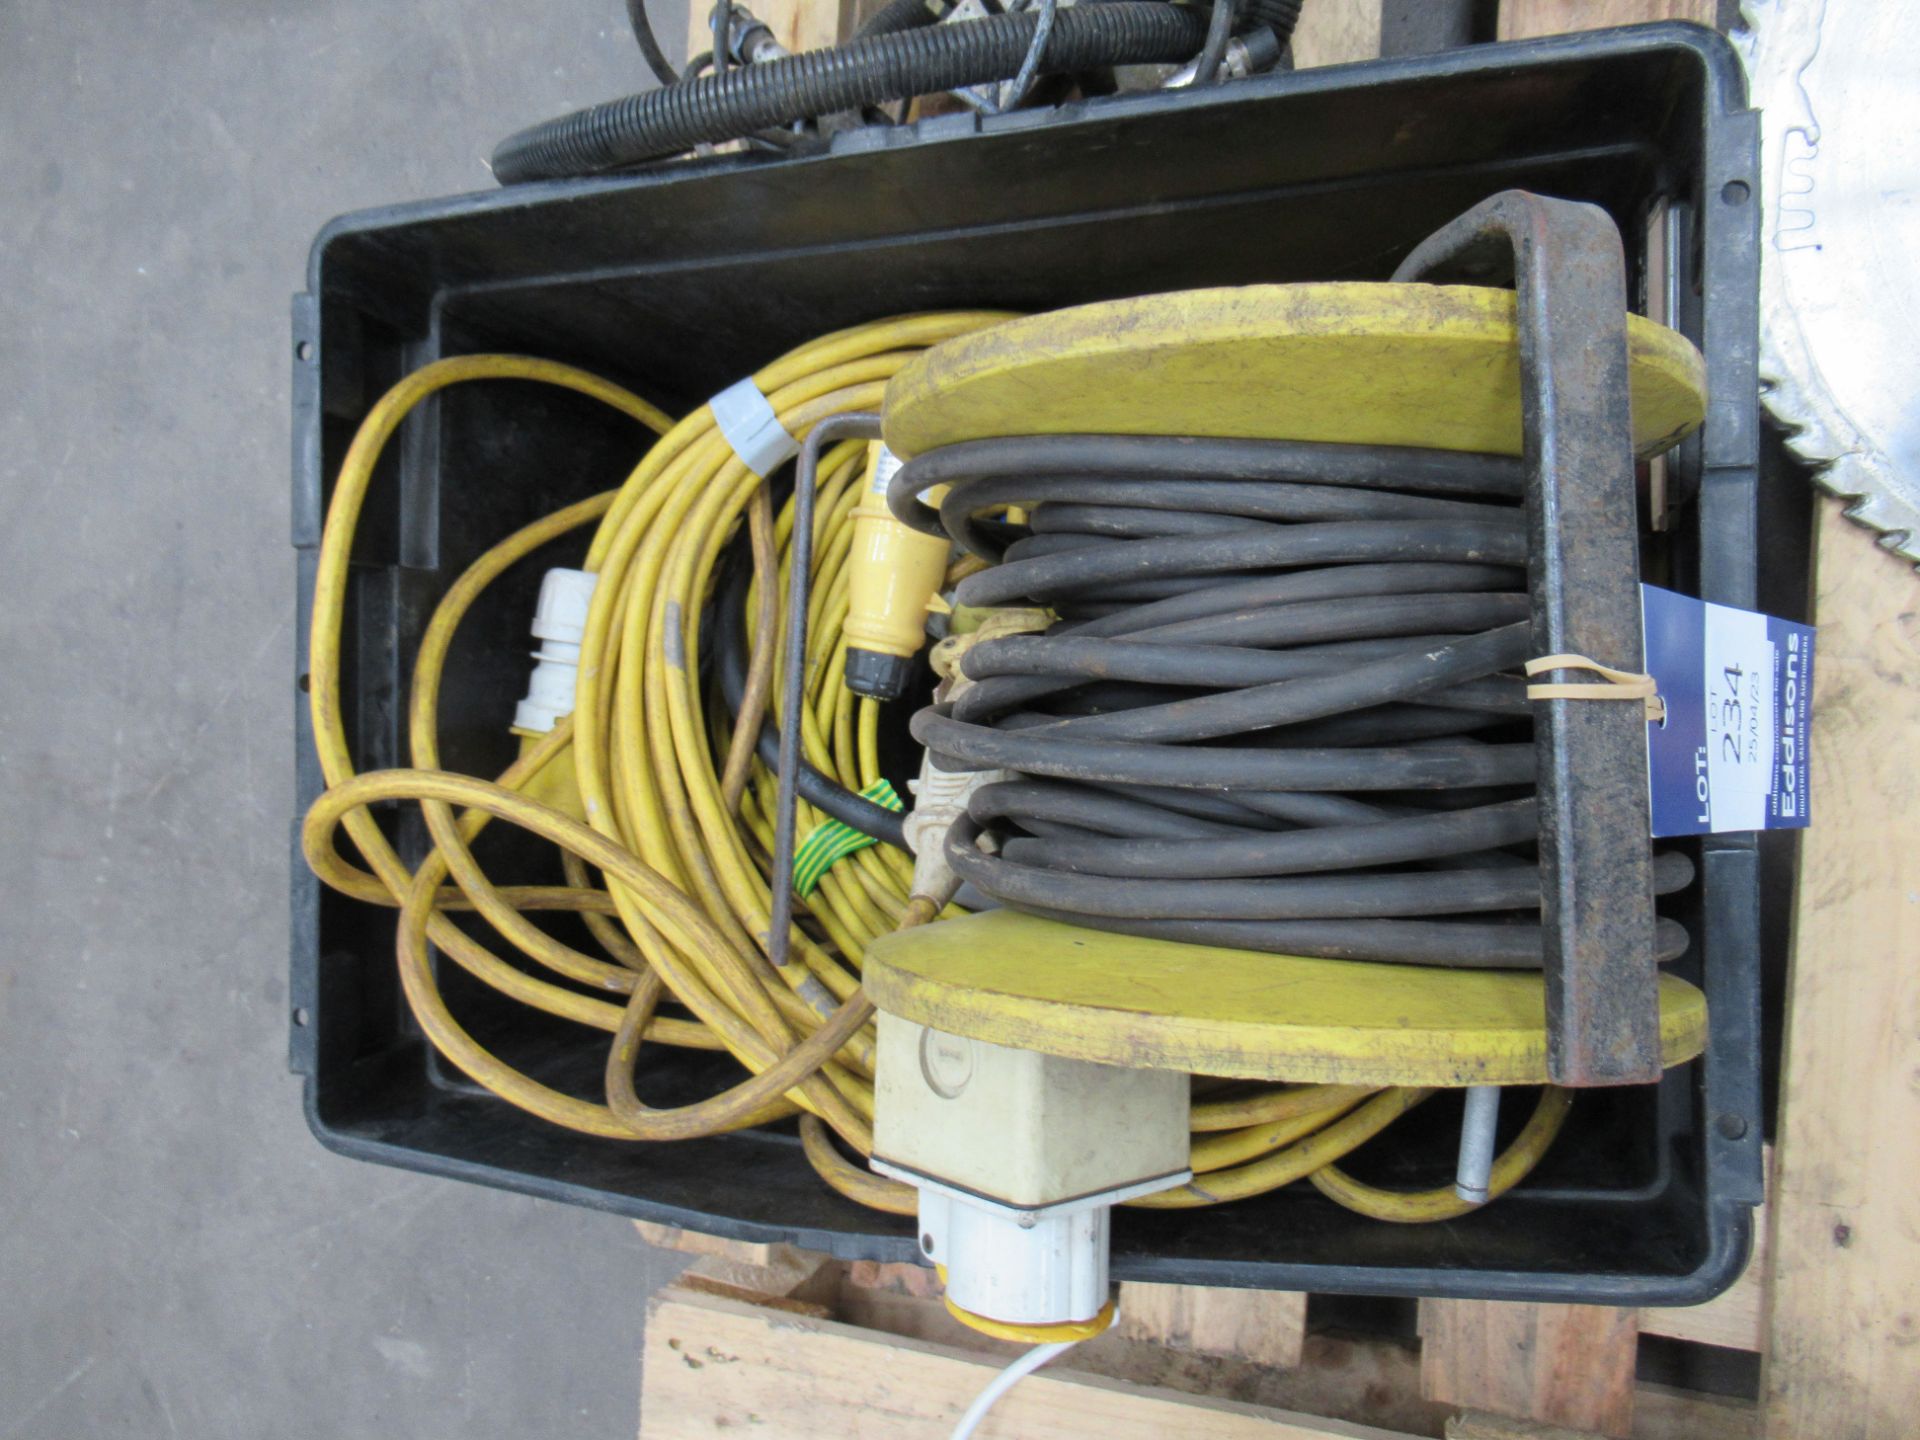 110V Extension Leads, Saw Blades etc. - Image 4 of 4